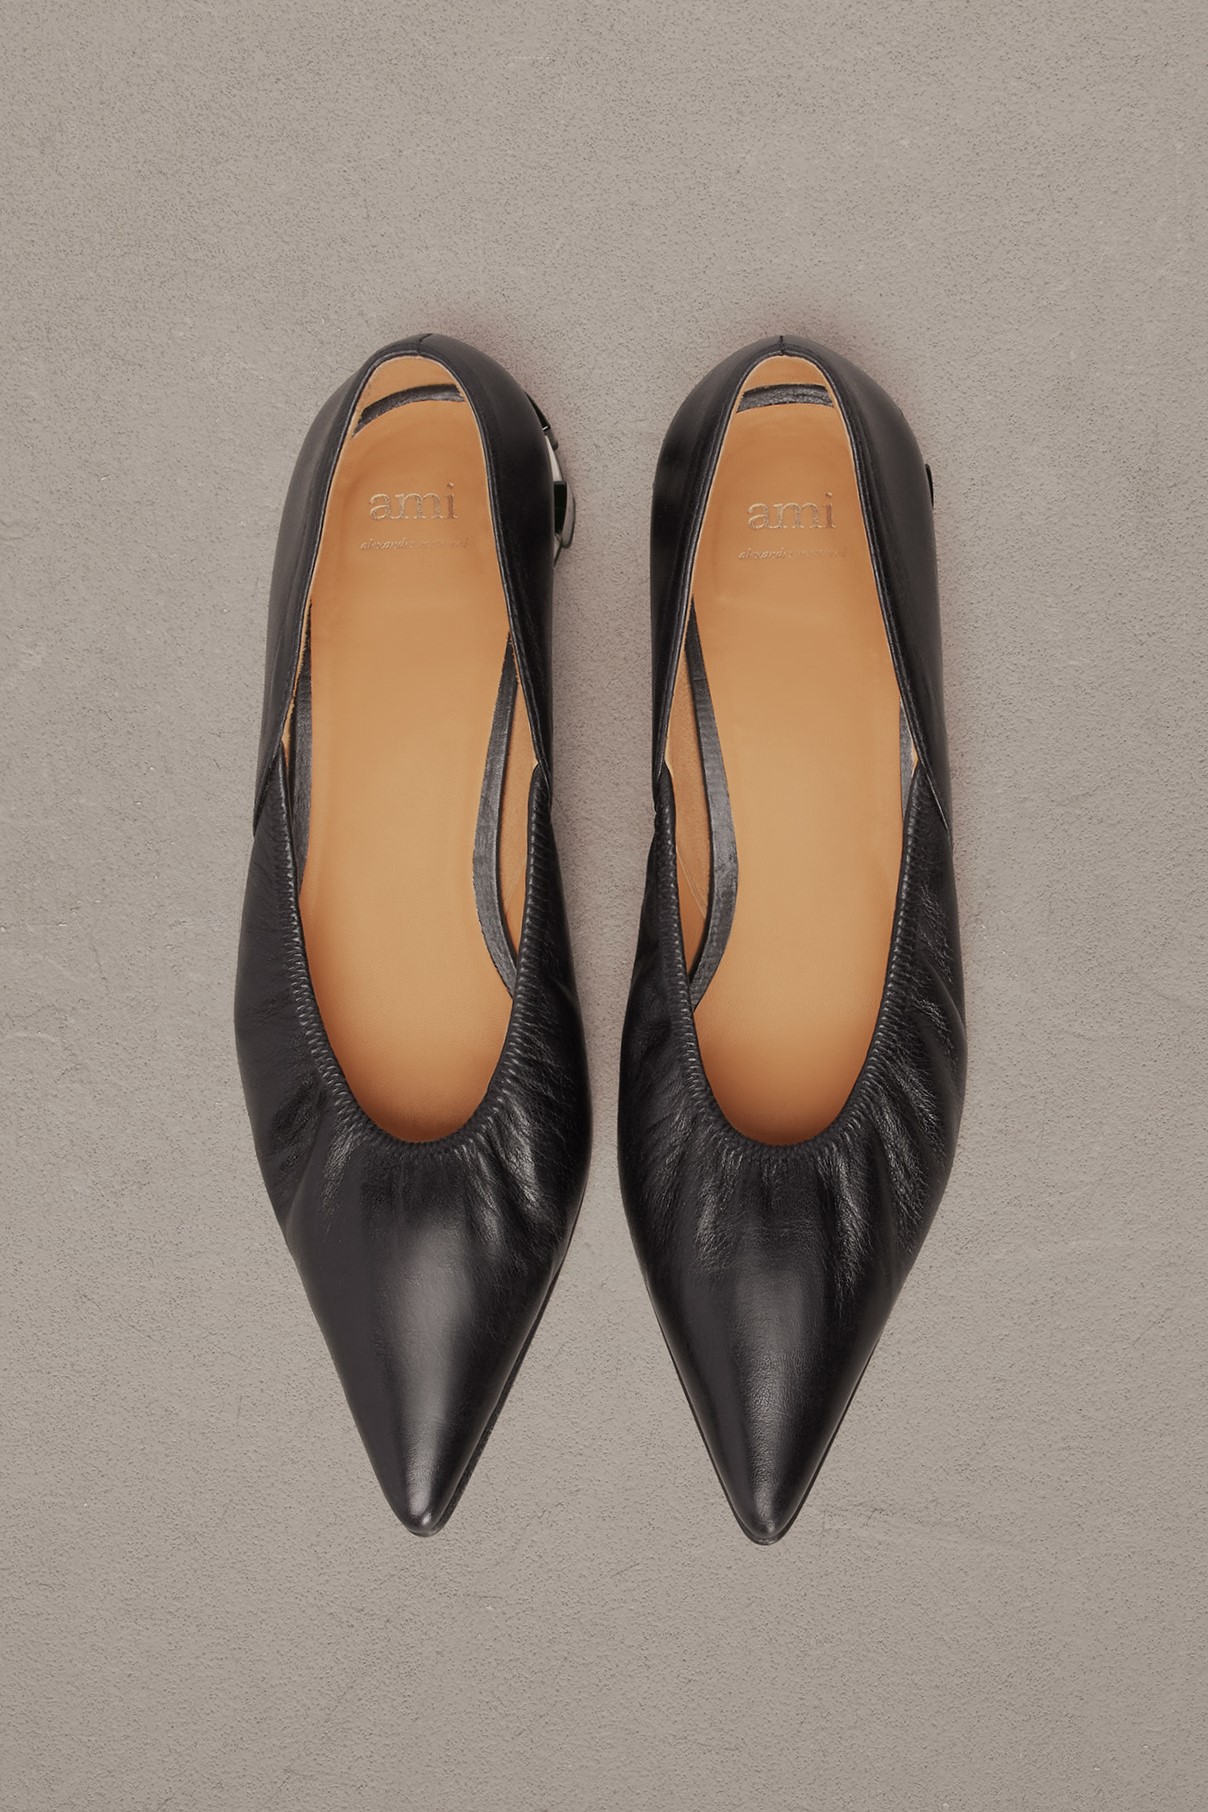 AMI PARIS Pointed Toe Pleated Shoes in Black 38